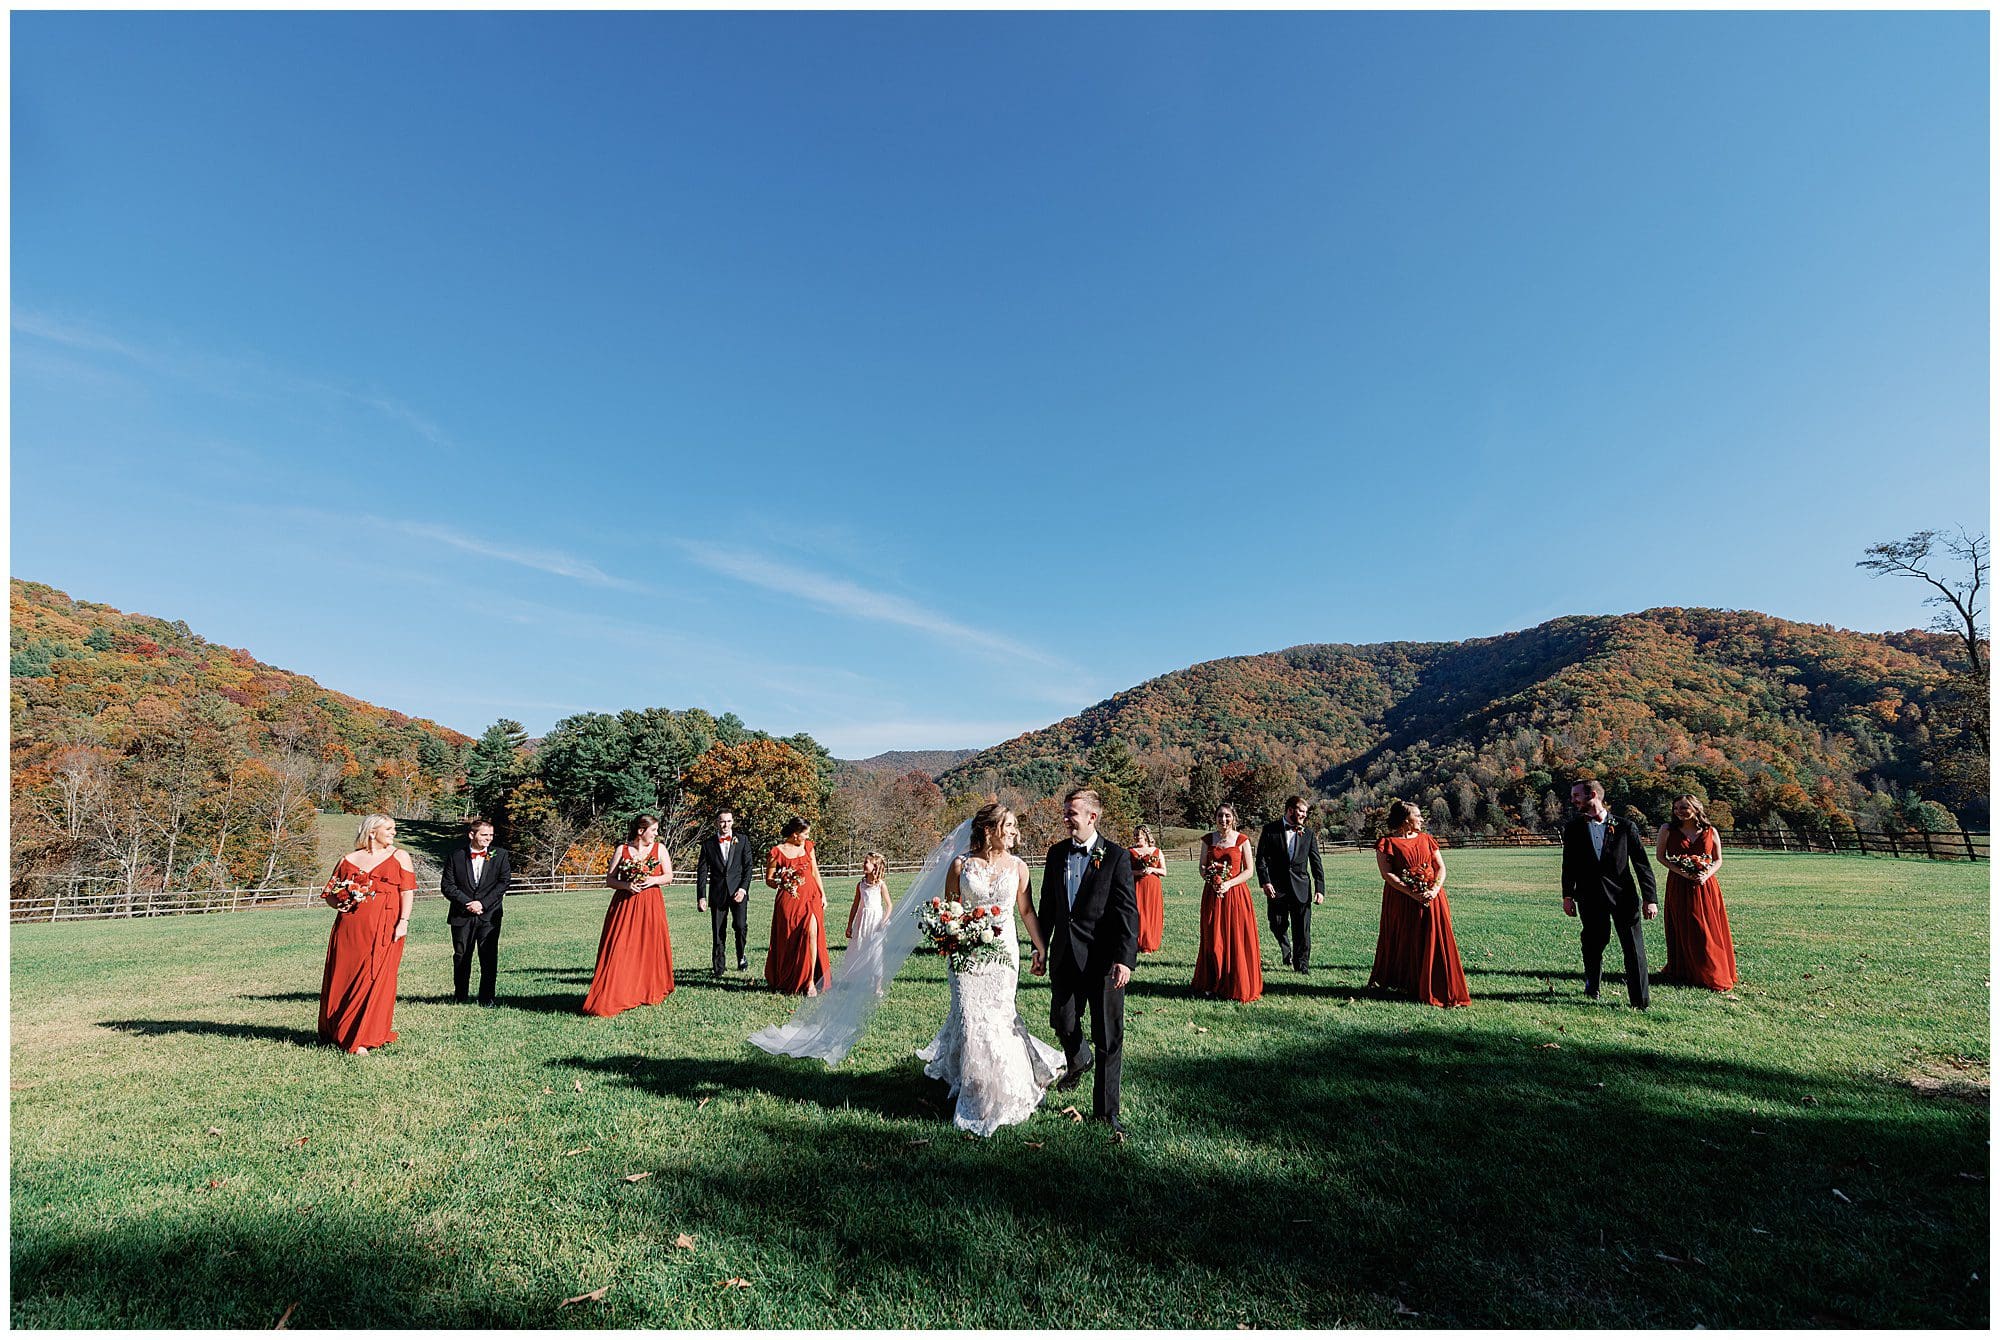 A wedding party outdoors with a bride and groom walking forward, surrounded by bridesmaids in red dresses and groomsmen in black suits, set against a scenic mountain backdrop.